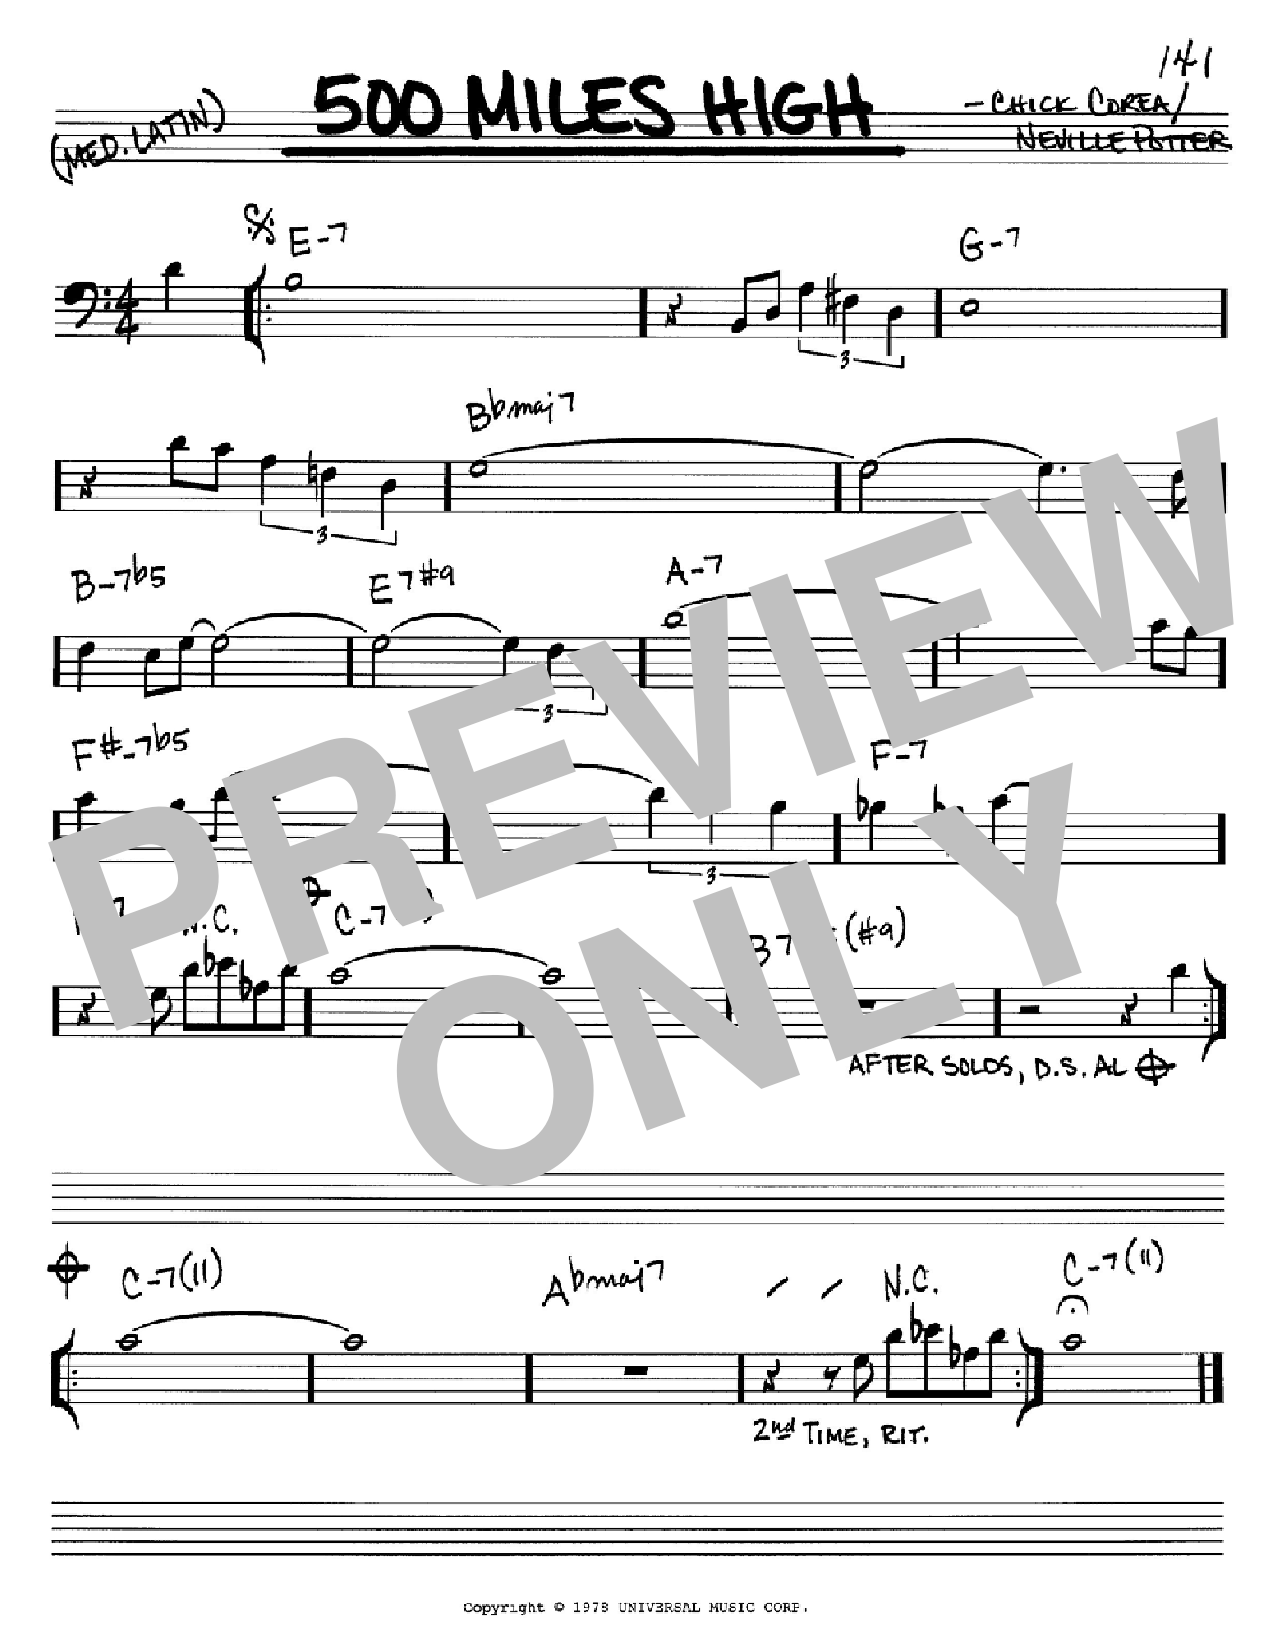 Download Chick Corea 500 Miles High Sheet Music